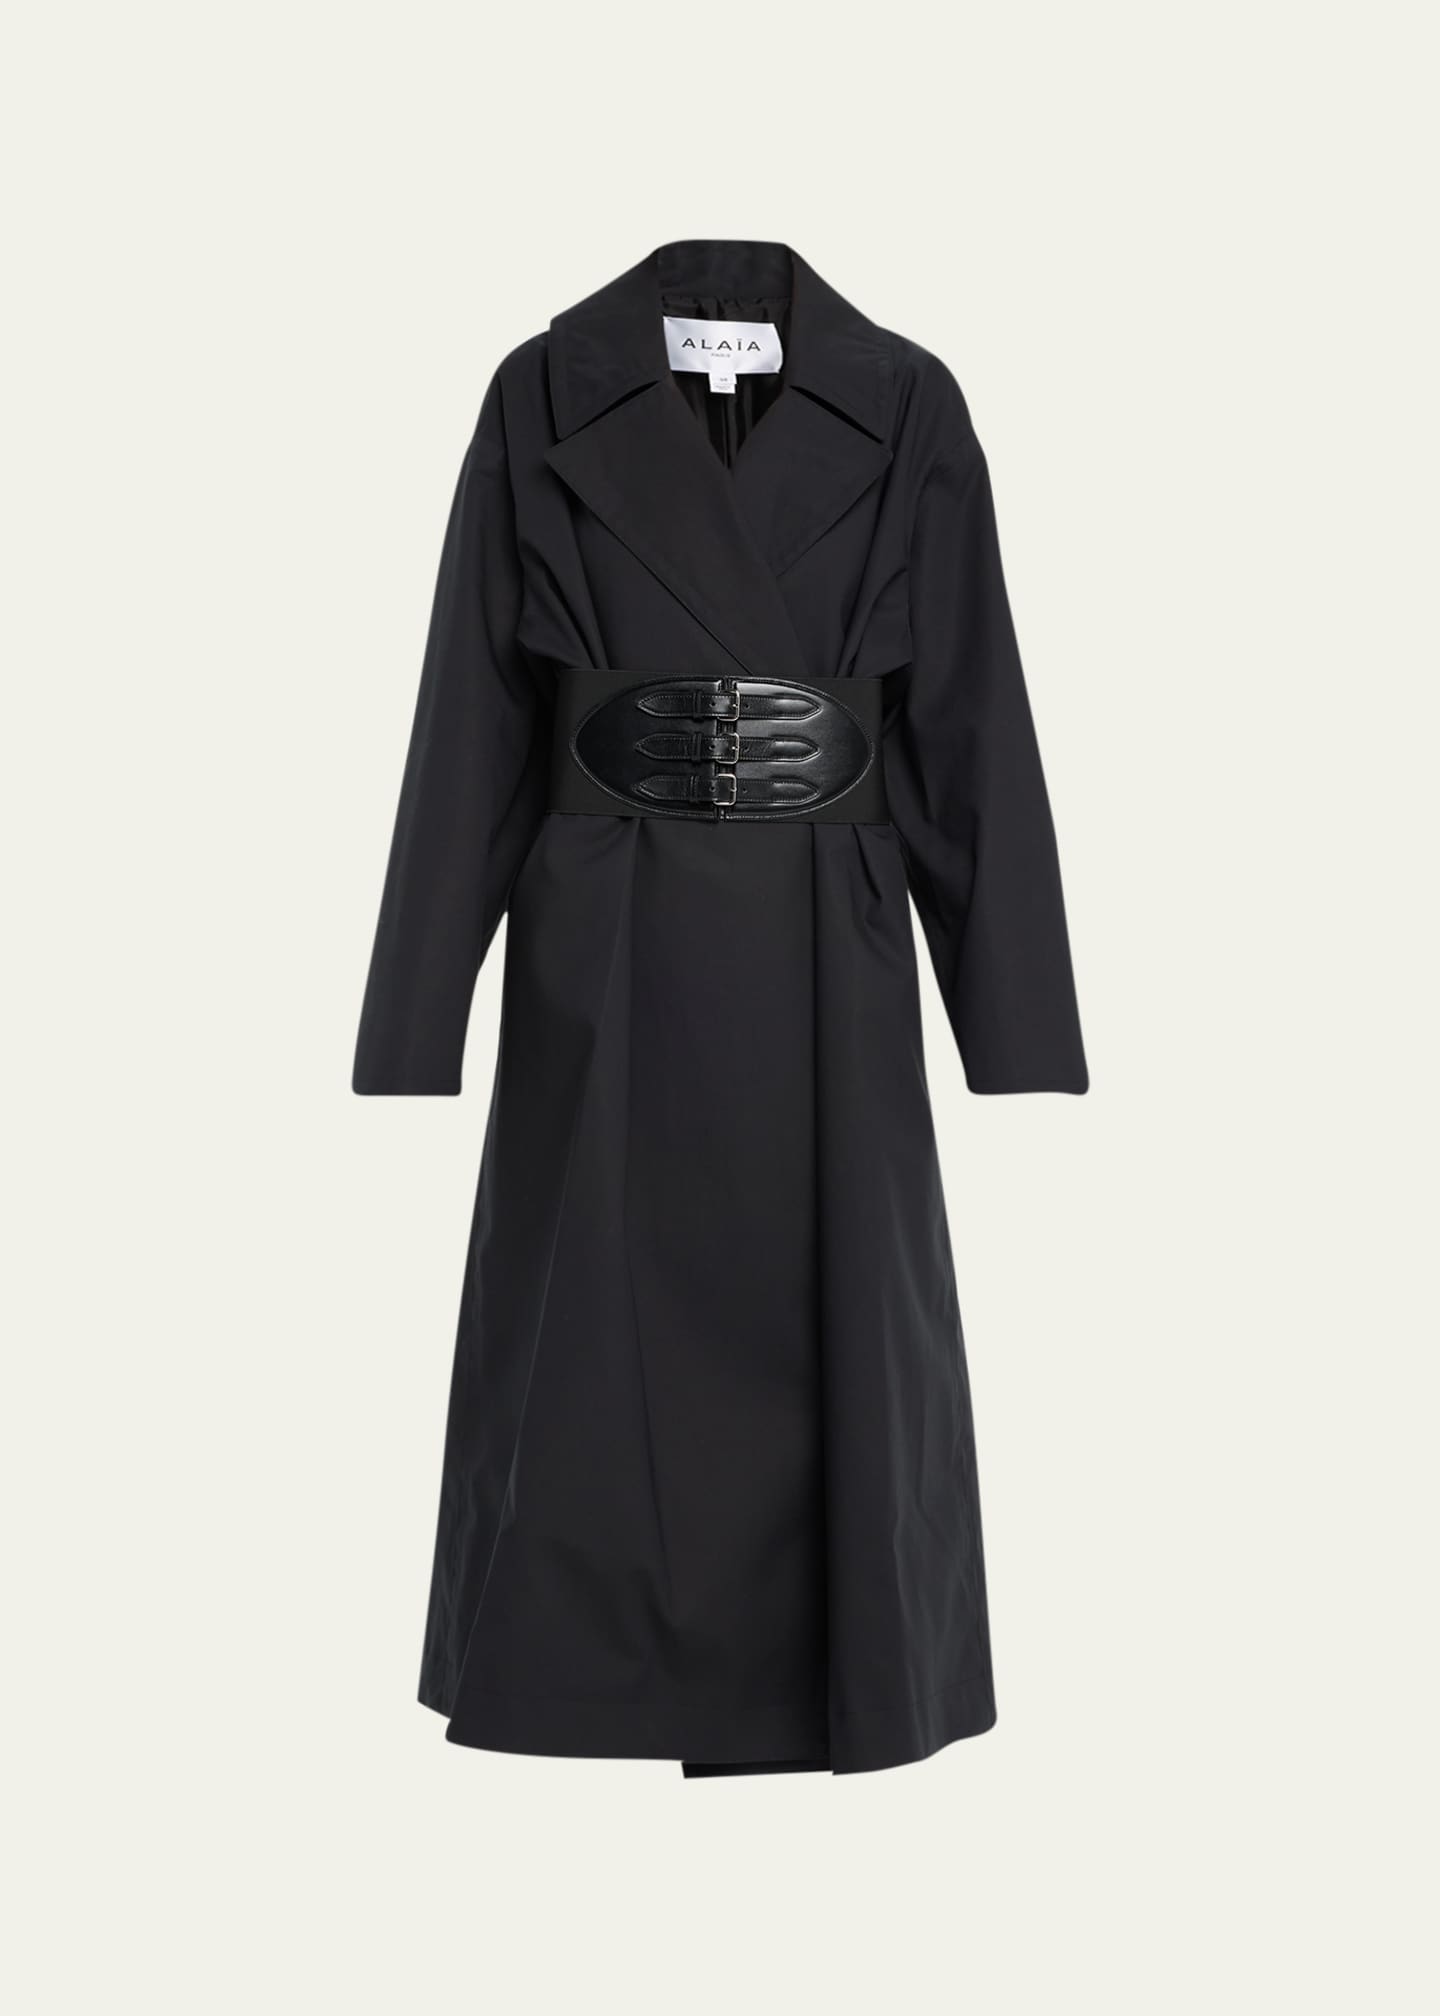 ALAIA Long Trench Coat with Leather Corset Belt - Bergdorf Goodman